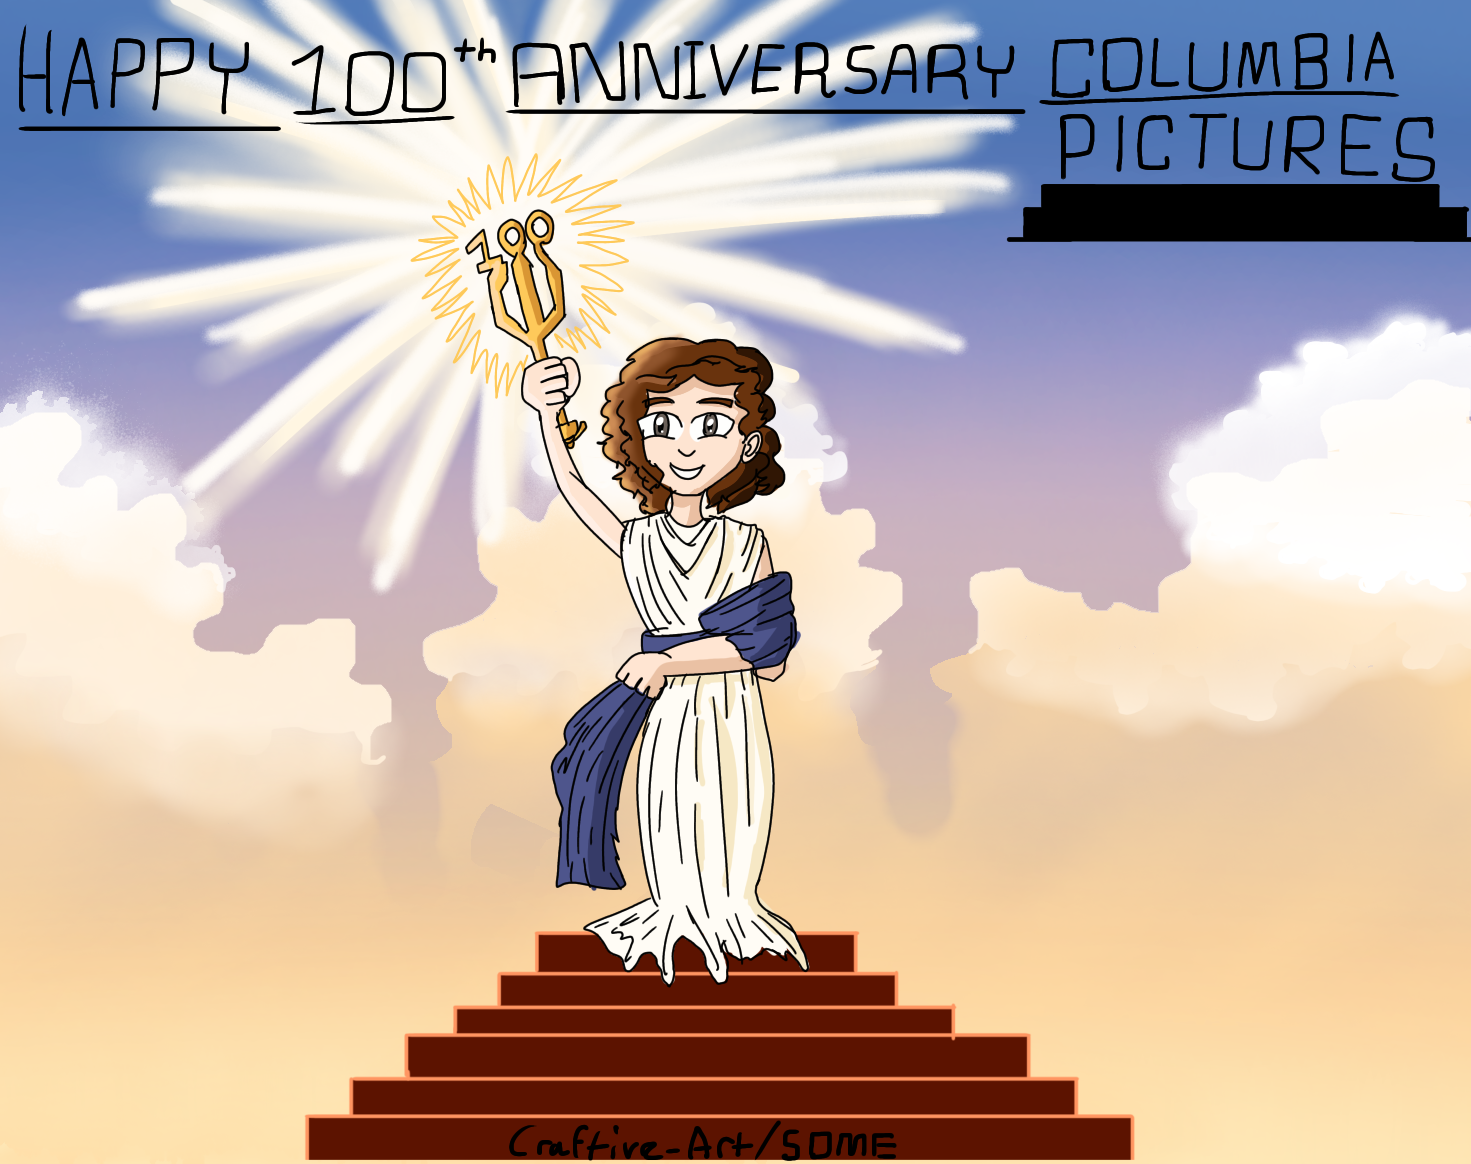 Happy 100th Anniversary Columbia Pictures! by AwesomeCraft on DeviantArt